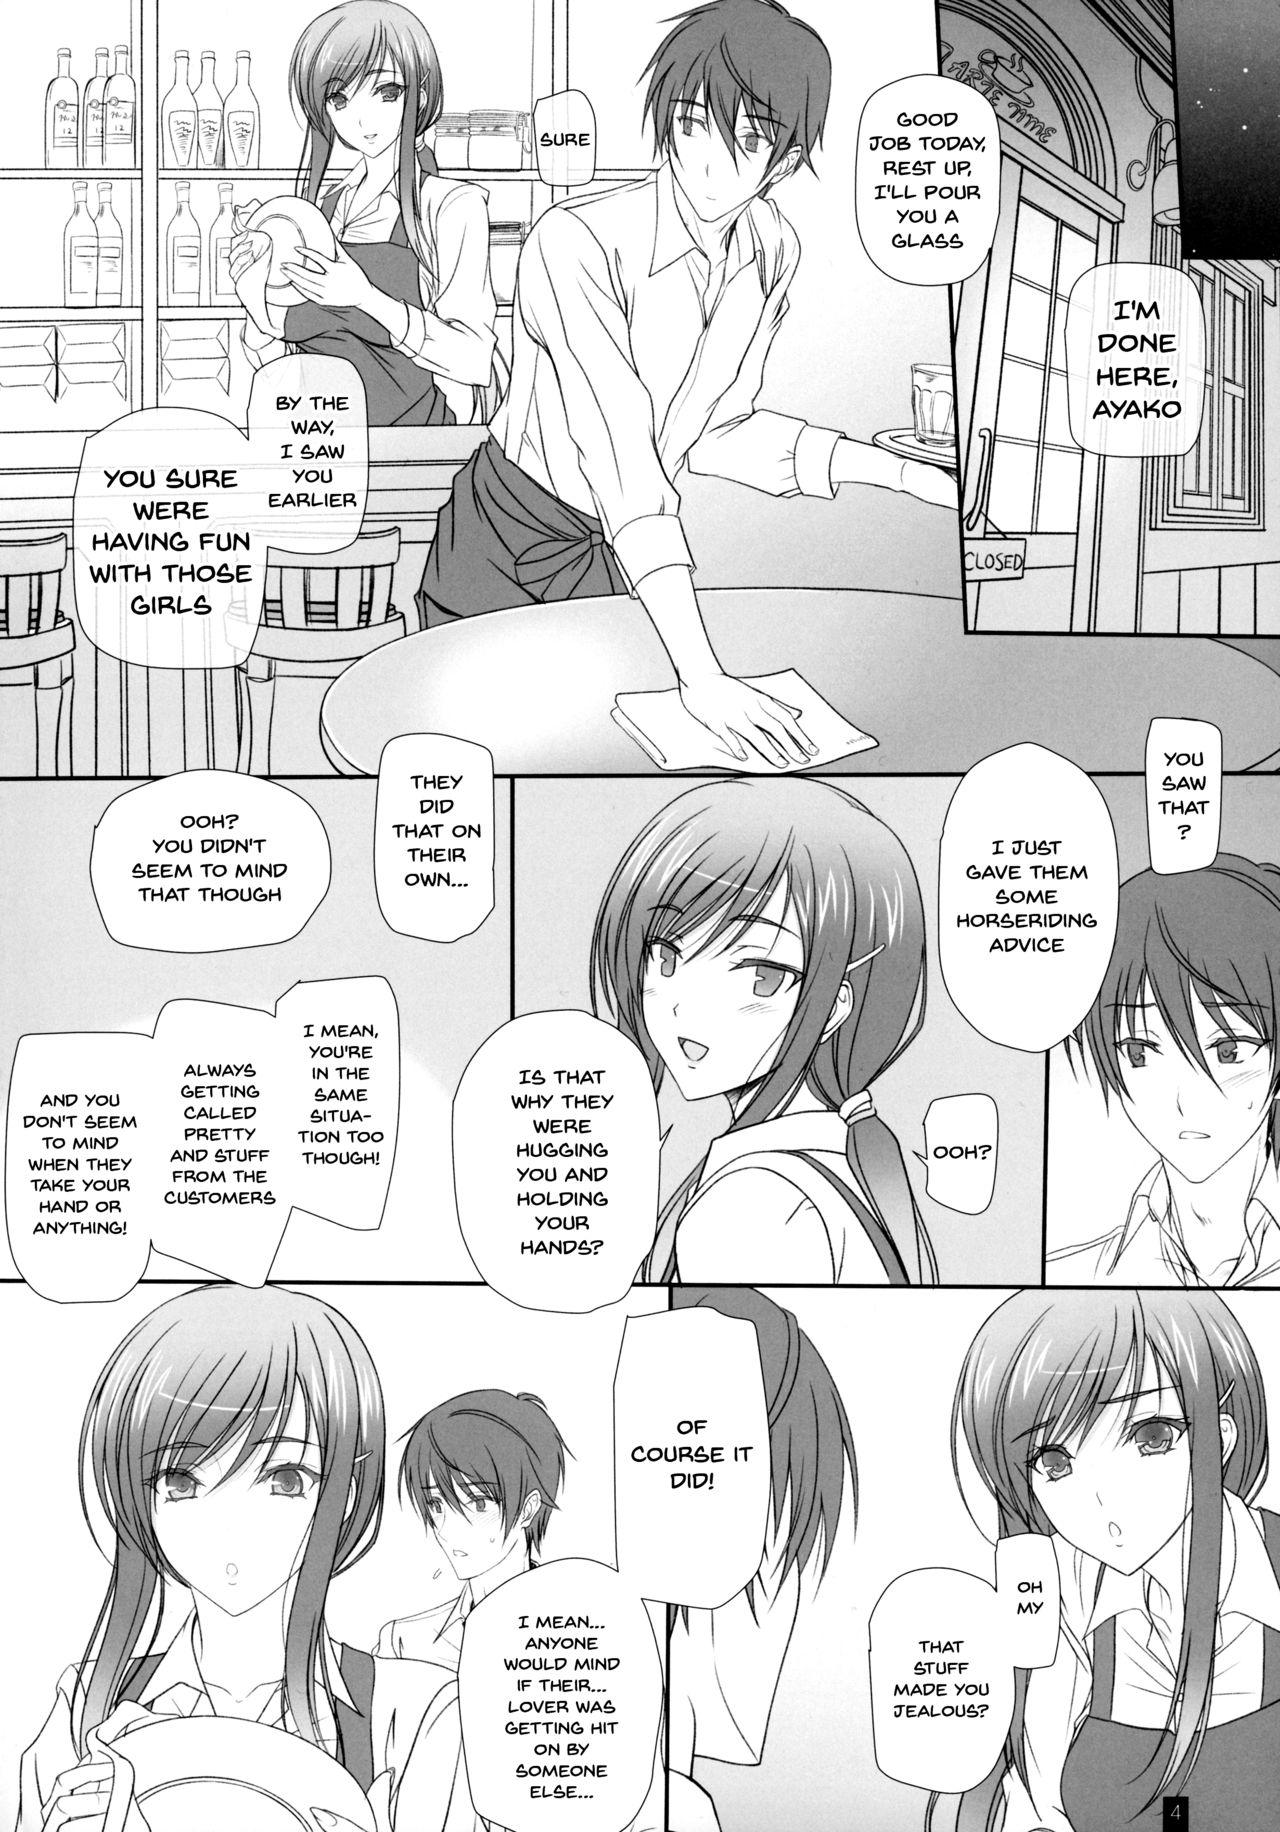 Old Oh! Ayako! More!&More!! - Walkure romanze Highschool - Page 3